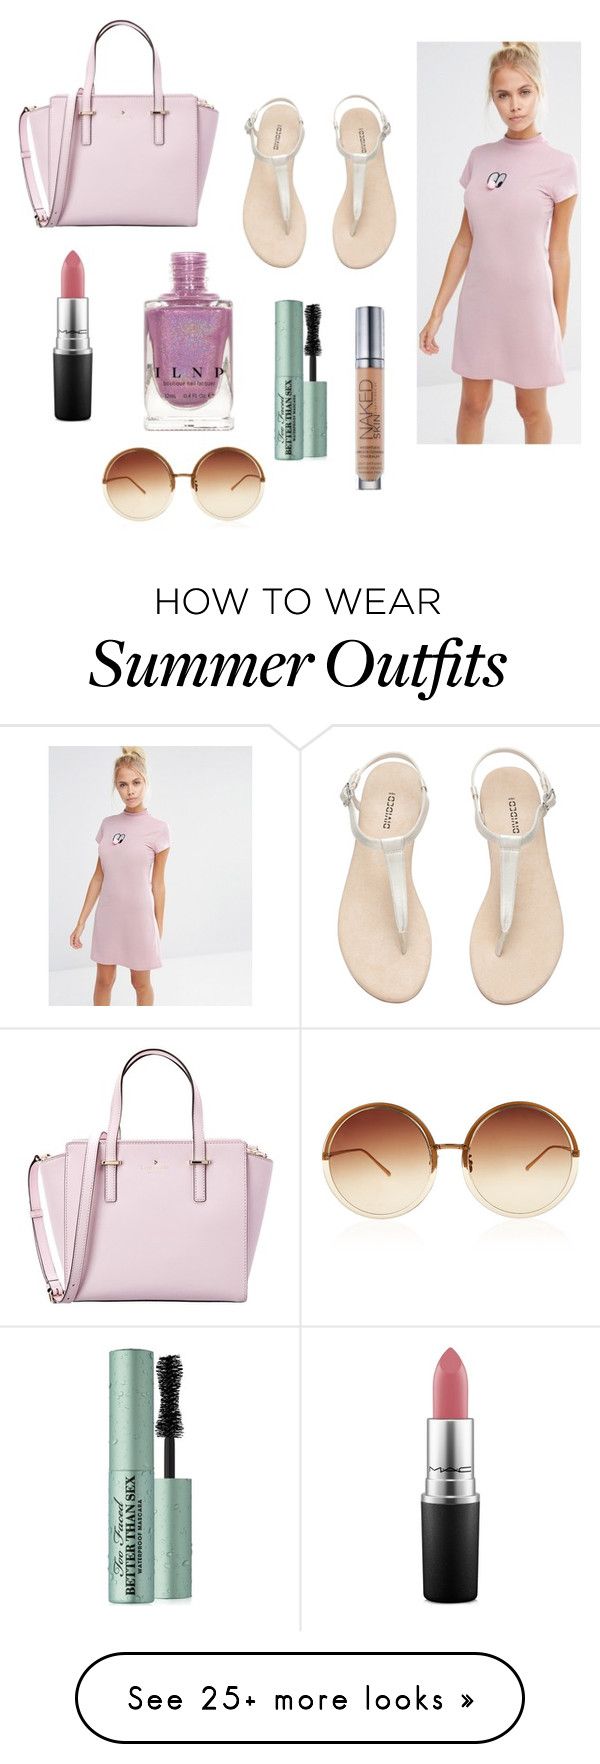 "Daisy causal summer outfit" by abbey-pearce on Polyvore featuring Laz...